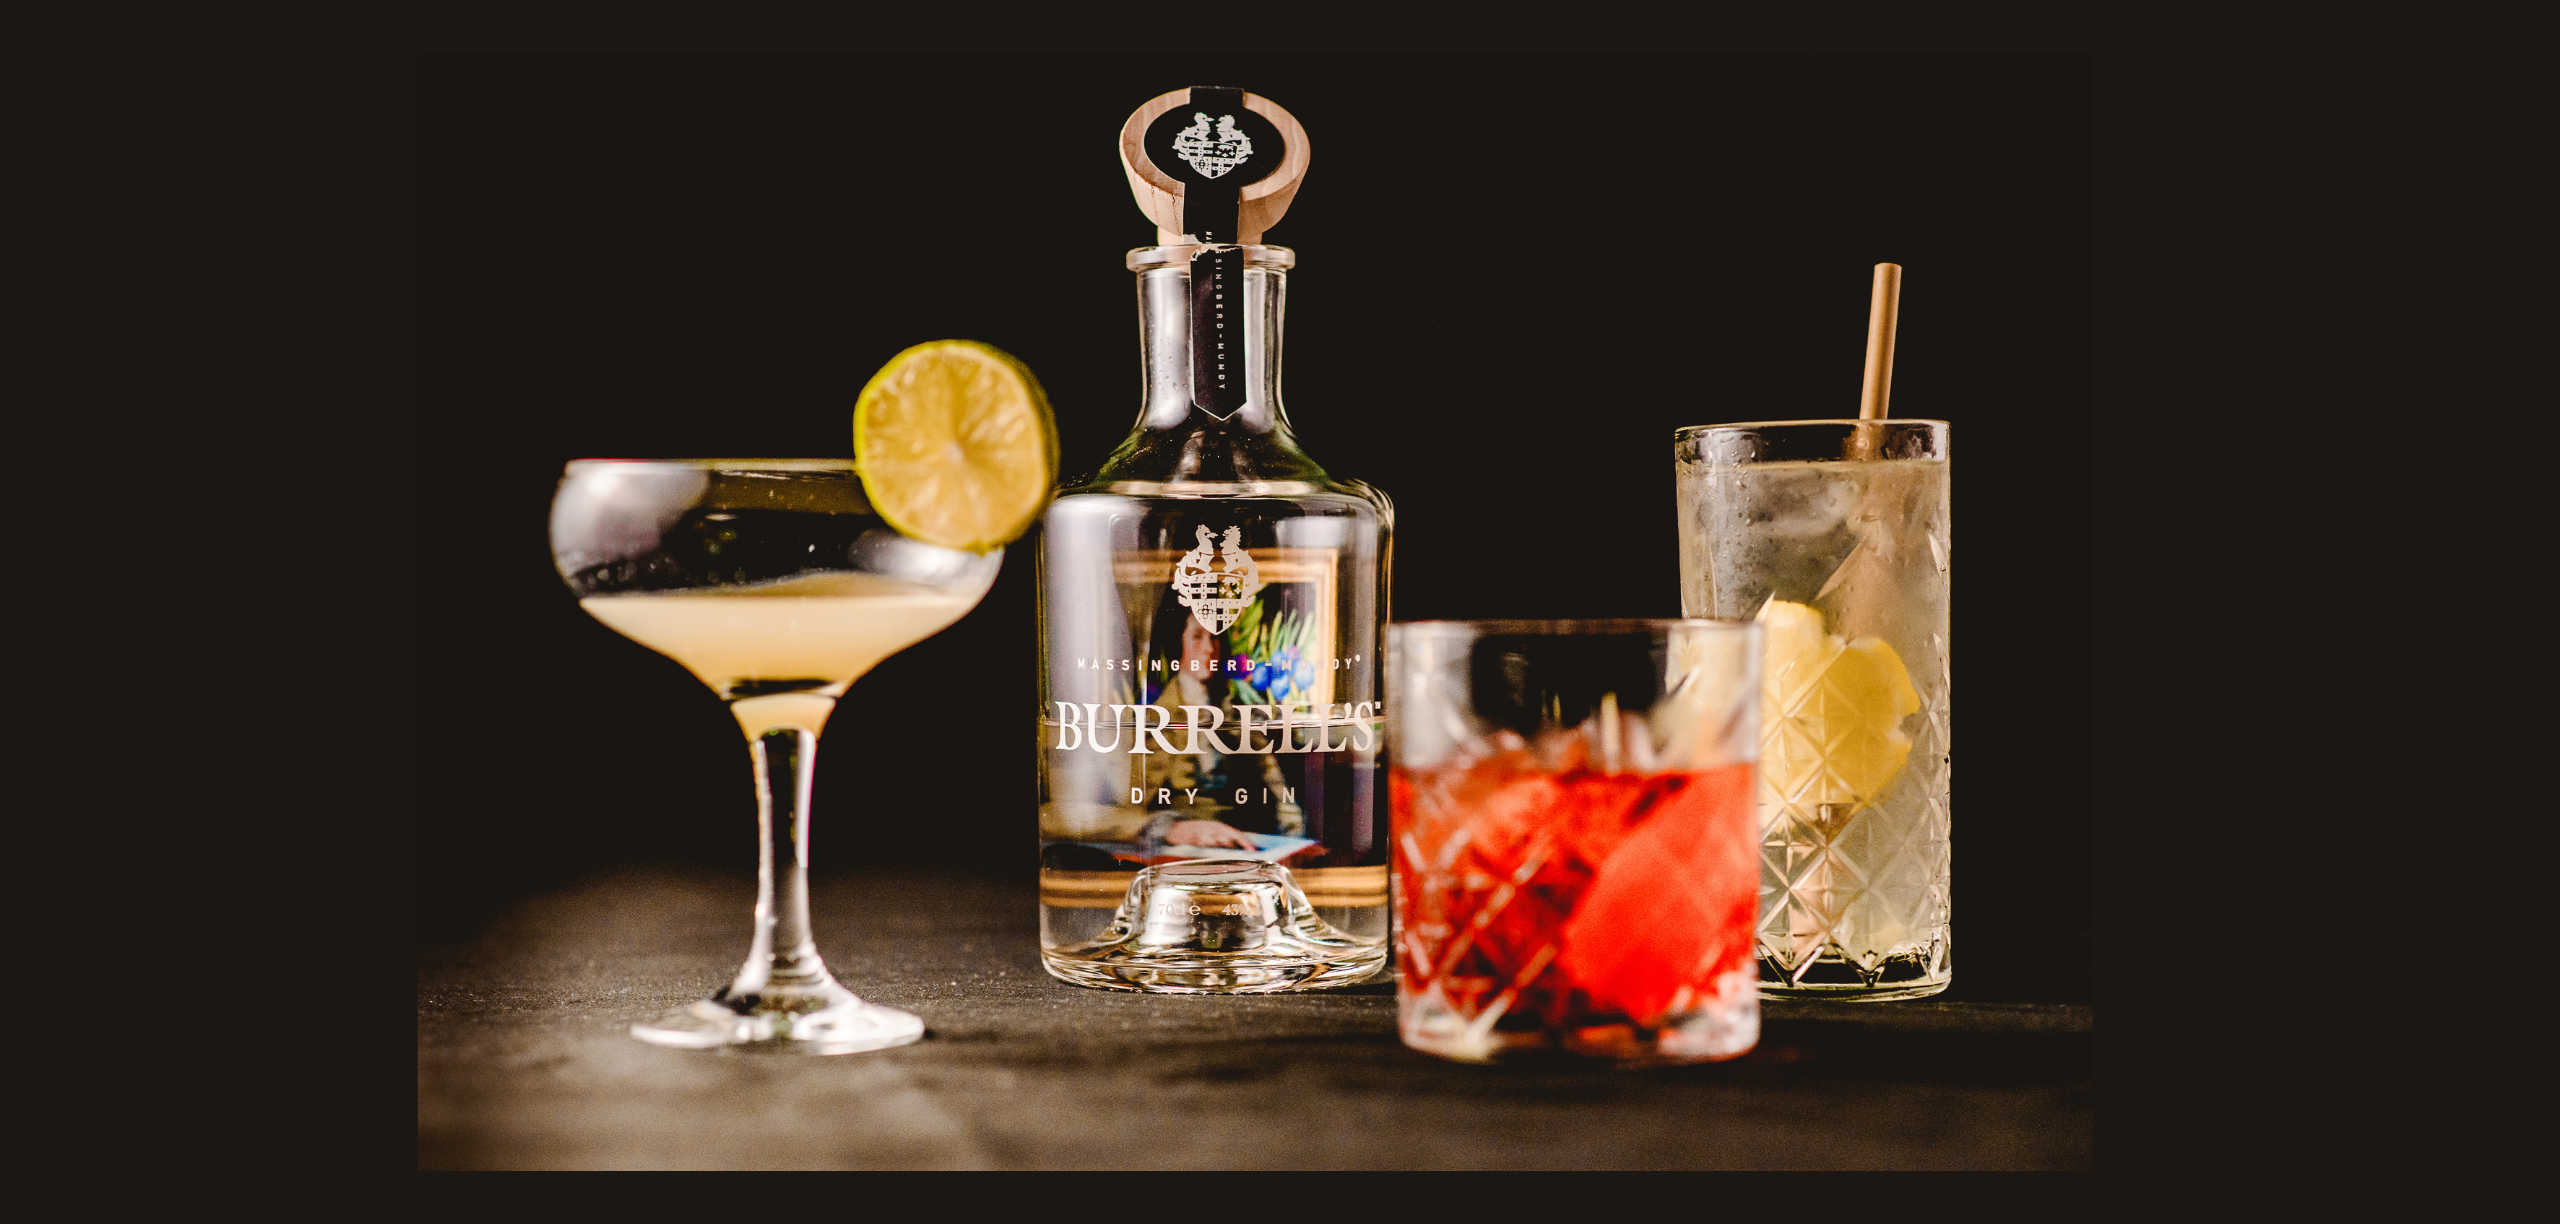 Burrell's Dry Gin and Cocktails